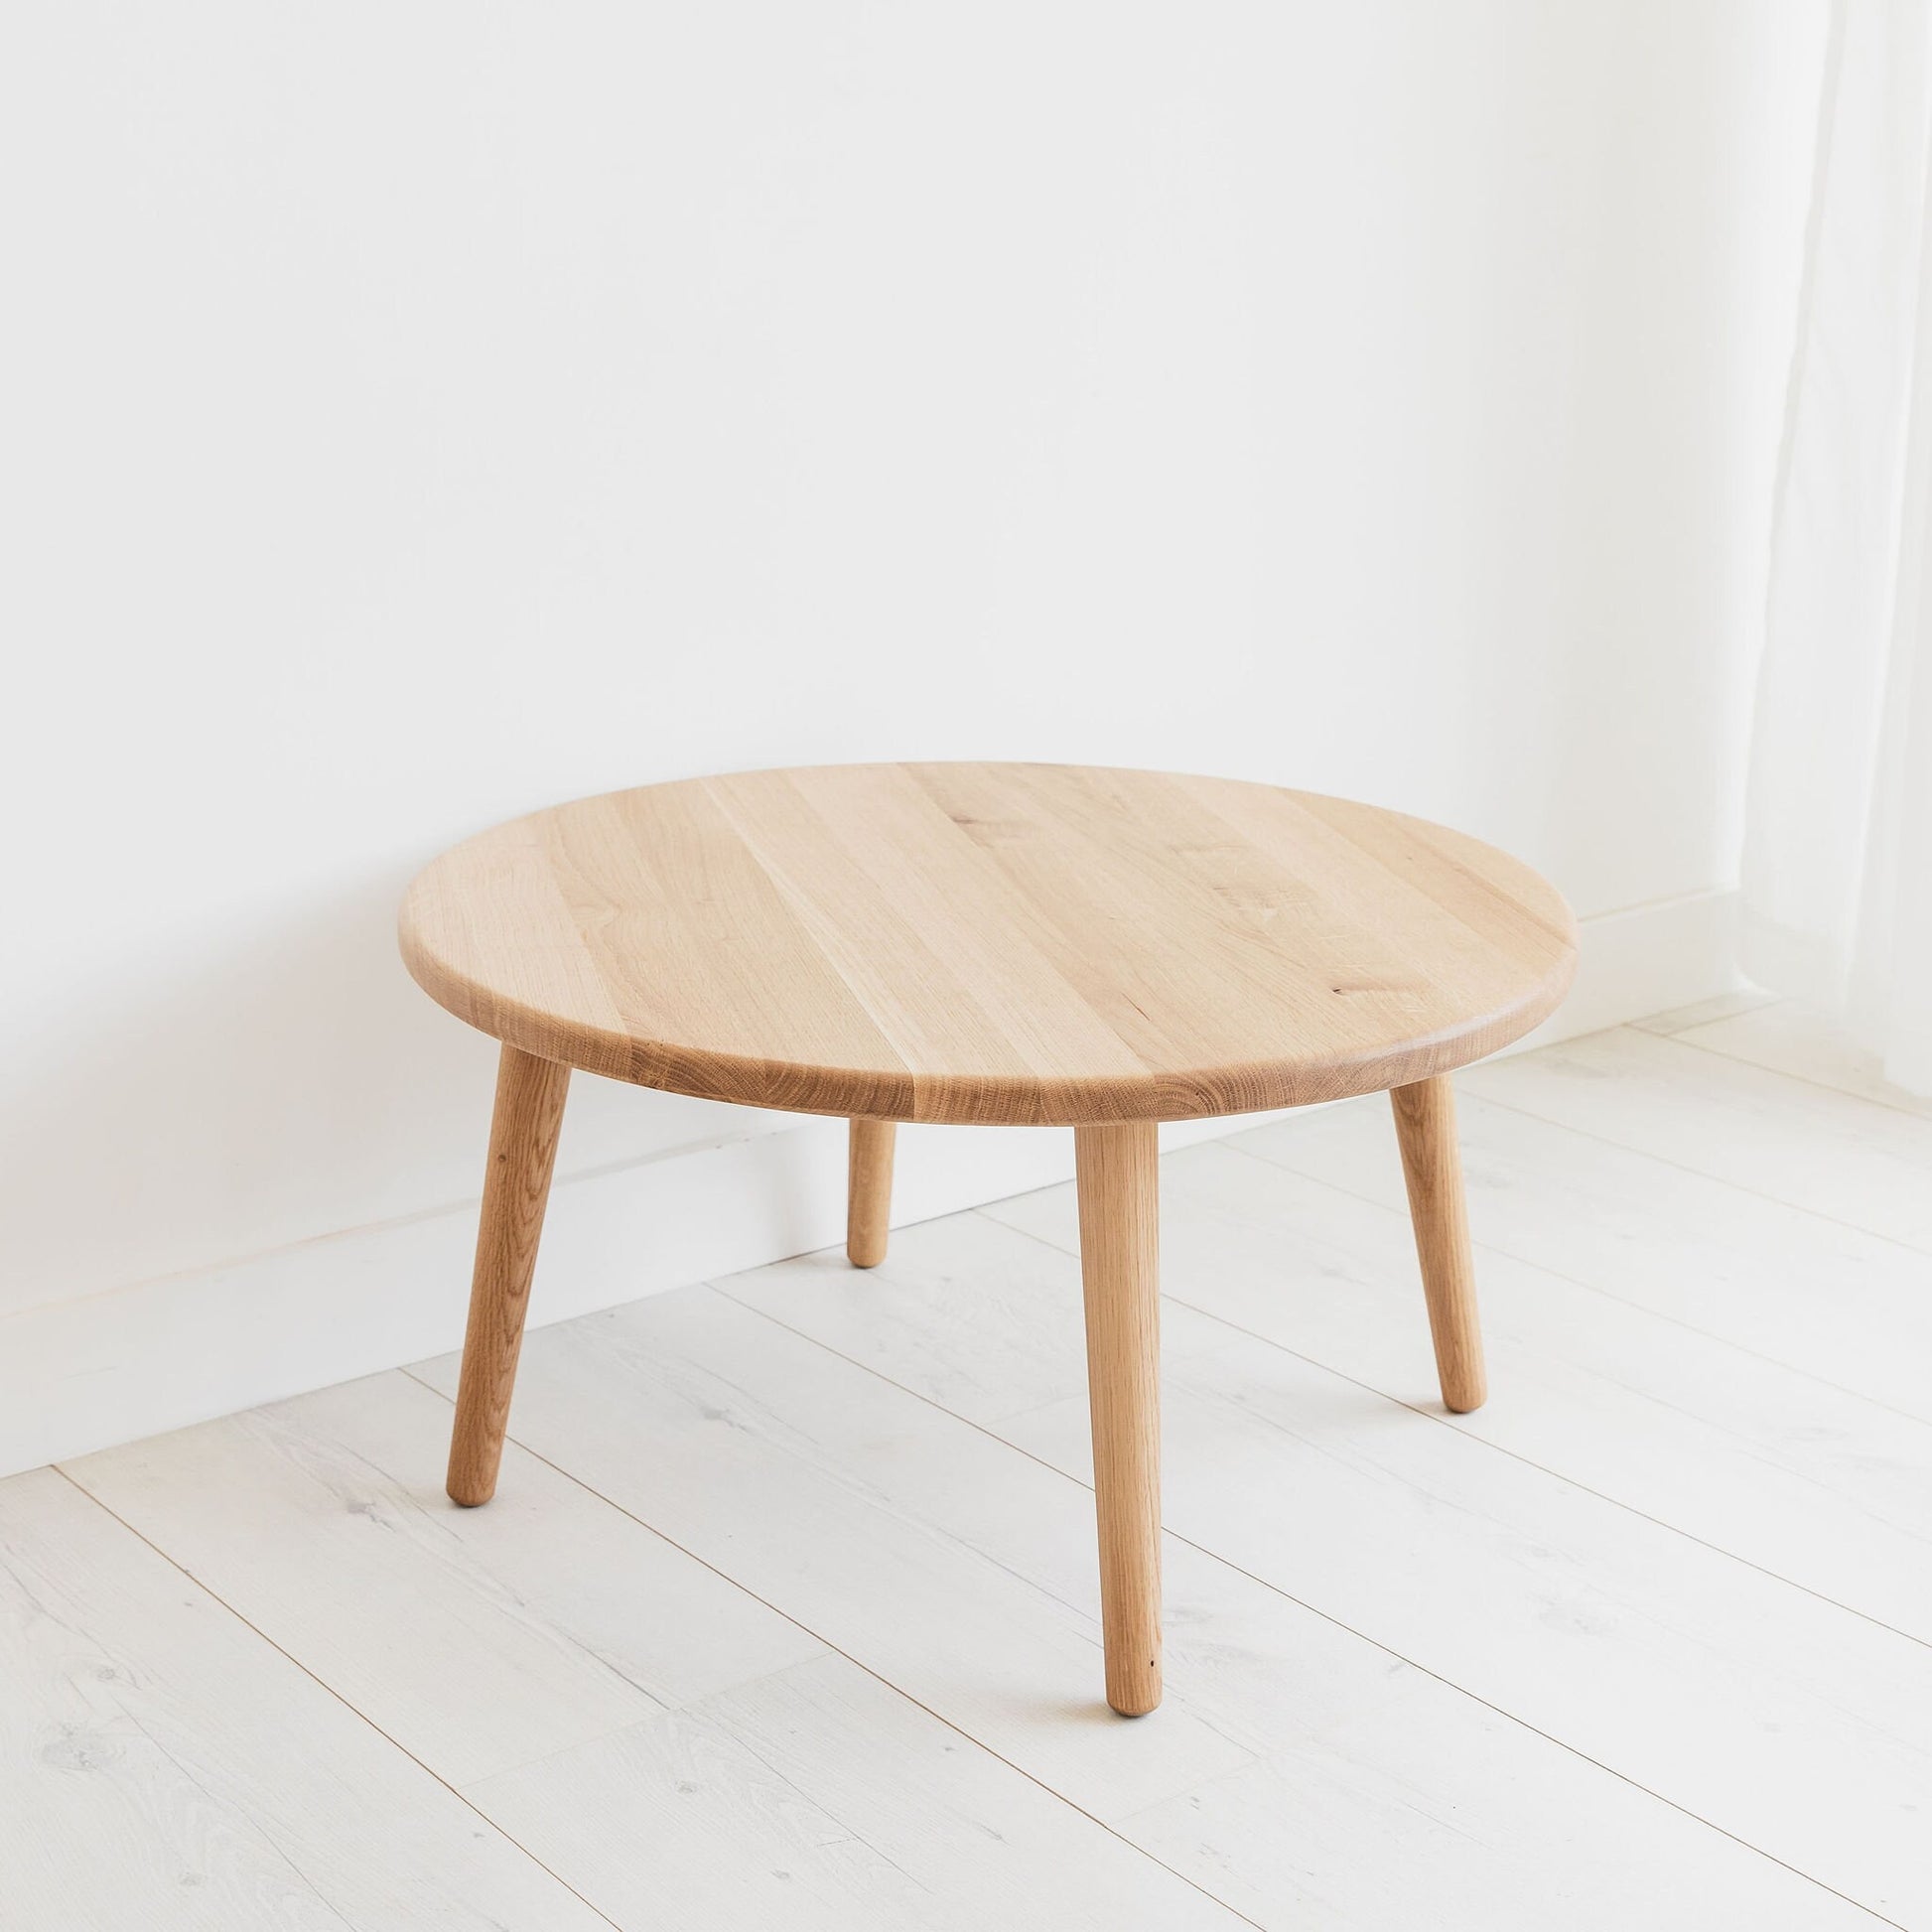 Round Oak Coffee Table. Solid Oak Hardwood Side Table. Mid Century Hand Made To Order In The UK. Modern Nordic Scandinavian Furniture